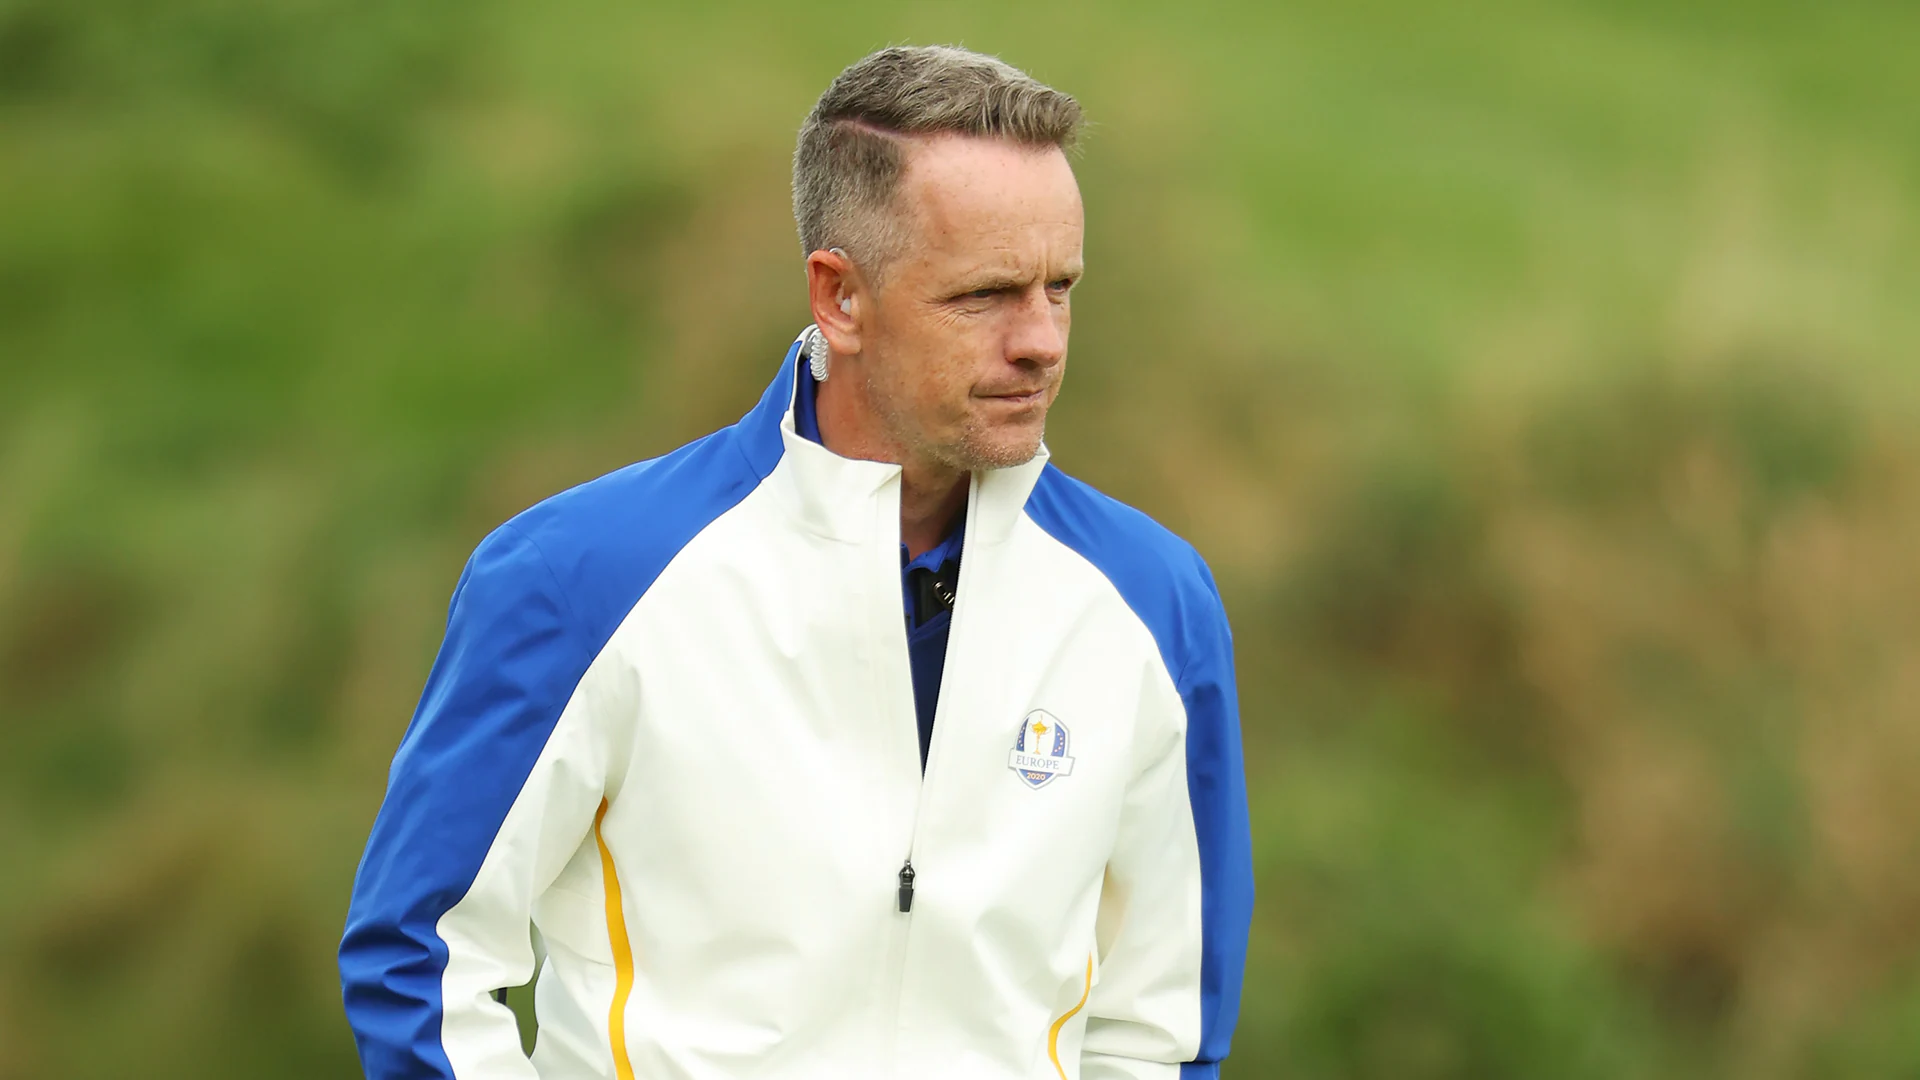 Report: Luke Donald to replace Henrik Stenson as 2023 European Ryder Cup captain